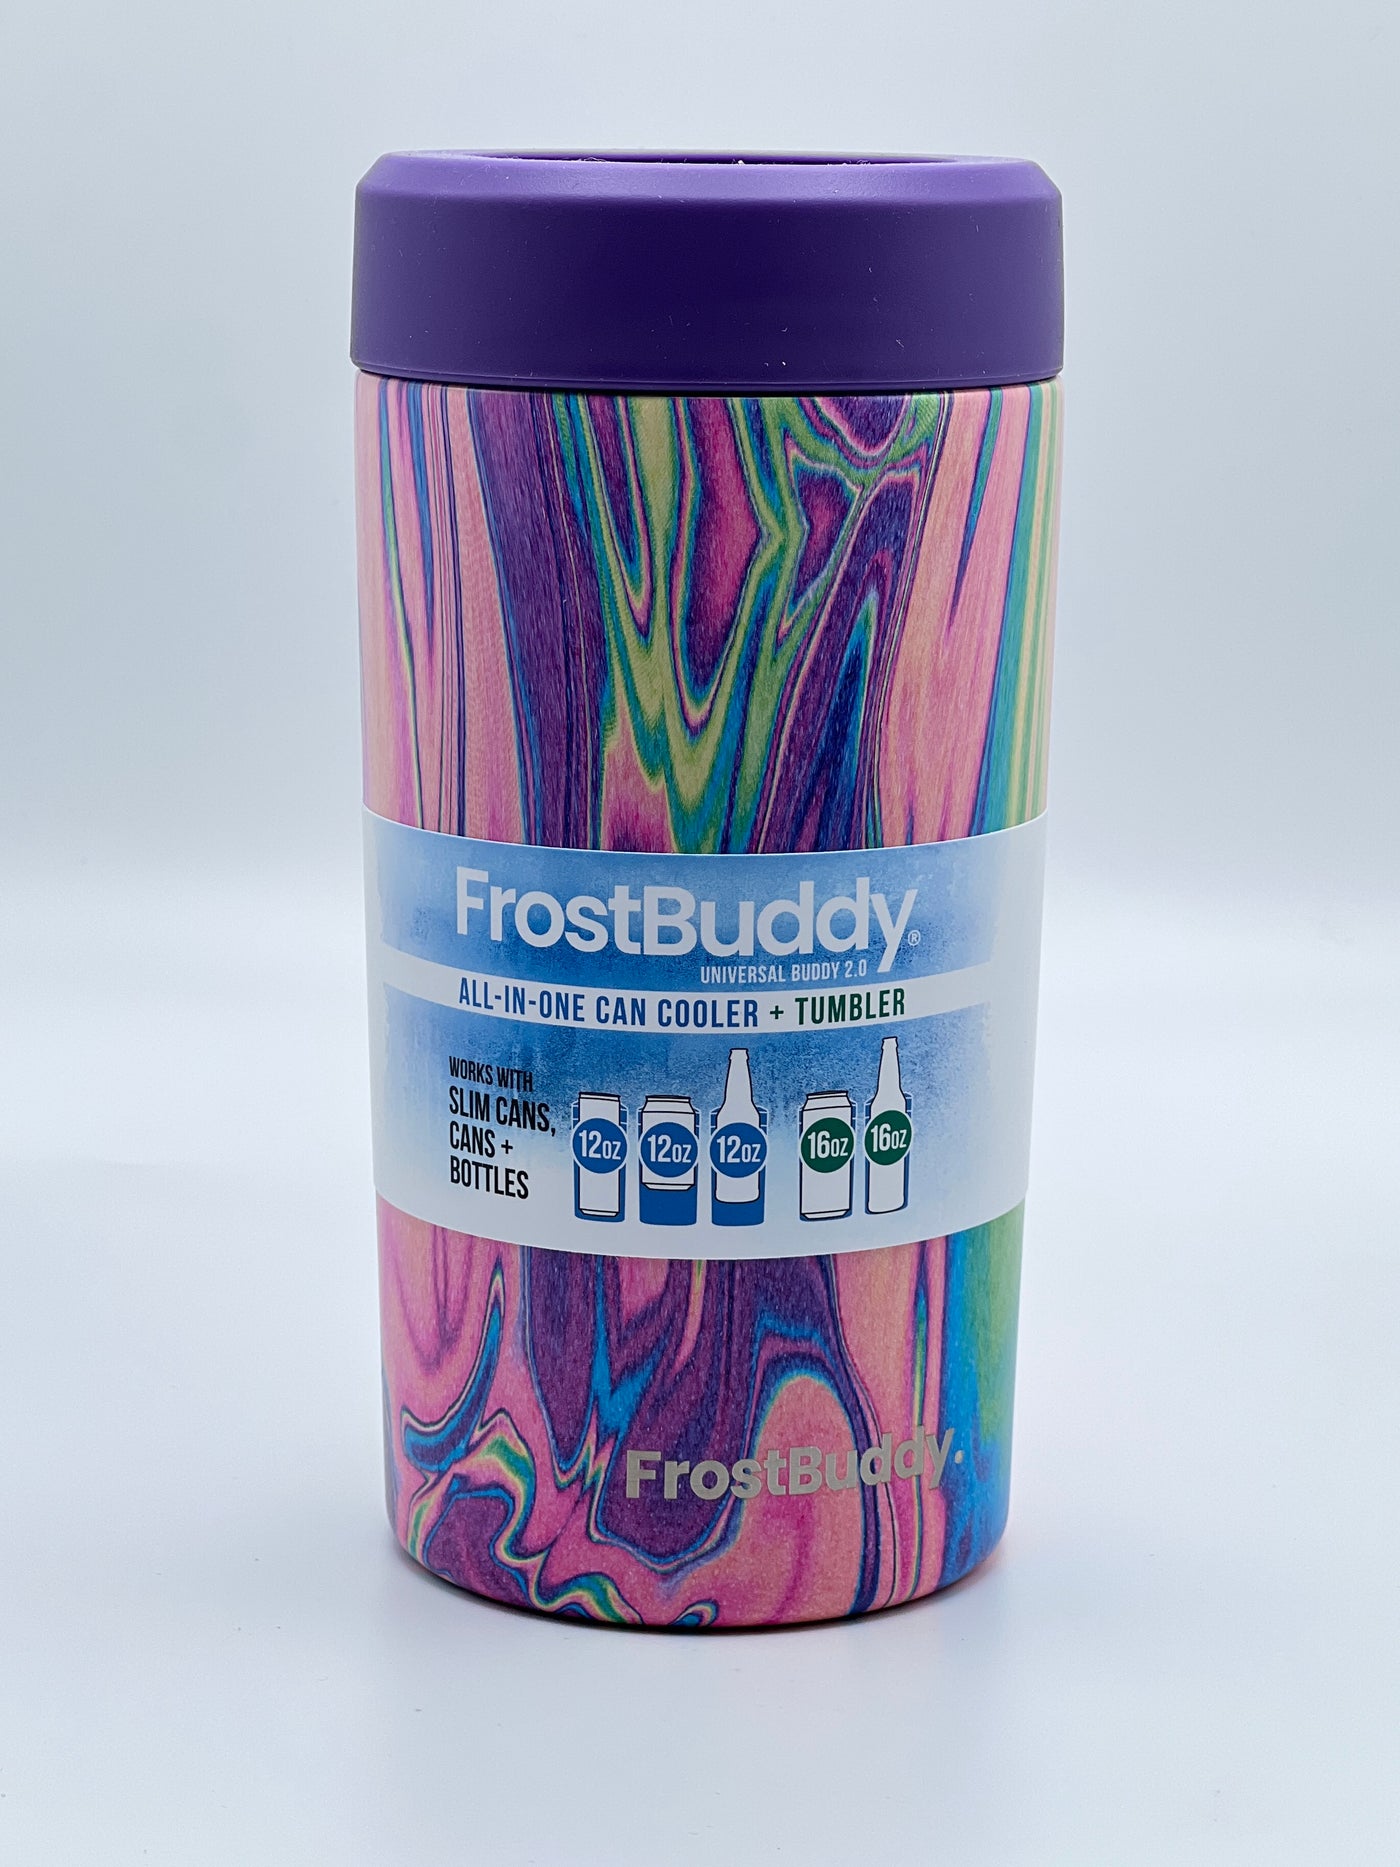 Frost Buddy Universal Can Cooler - Fits all - Stainless Steel Can Cooler  for 12 oz & 16 oz Regular or Slim Cans & Bottles - Stainless Steel (Aqua)